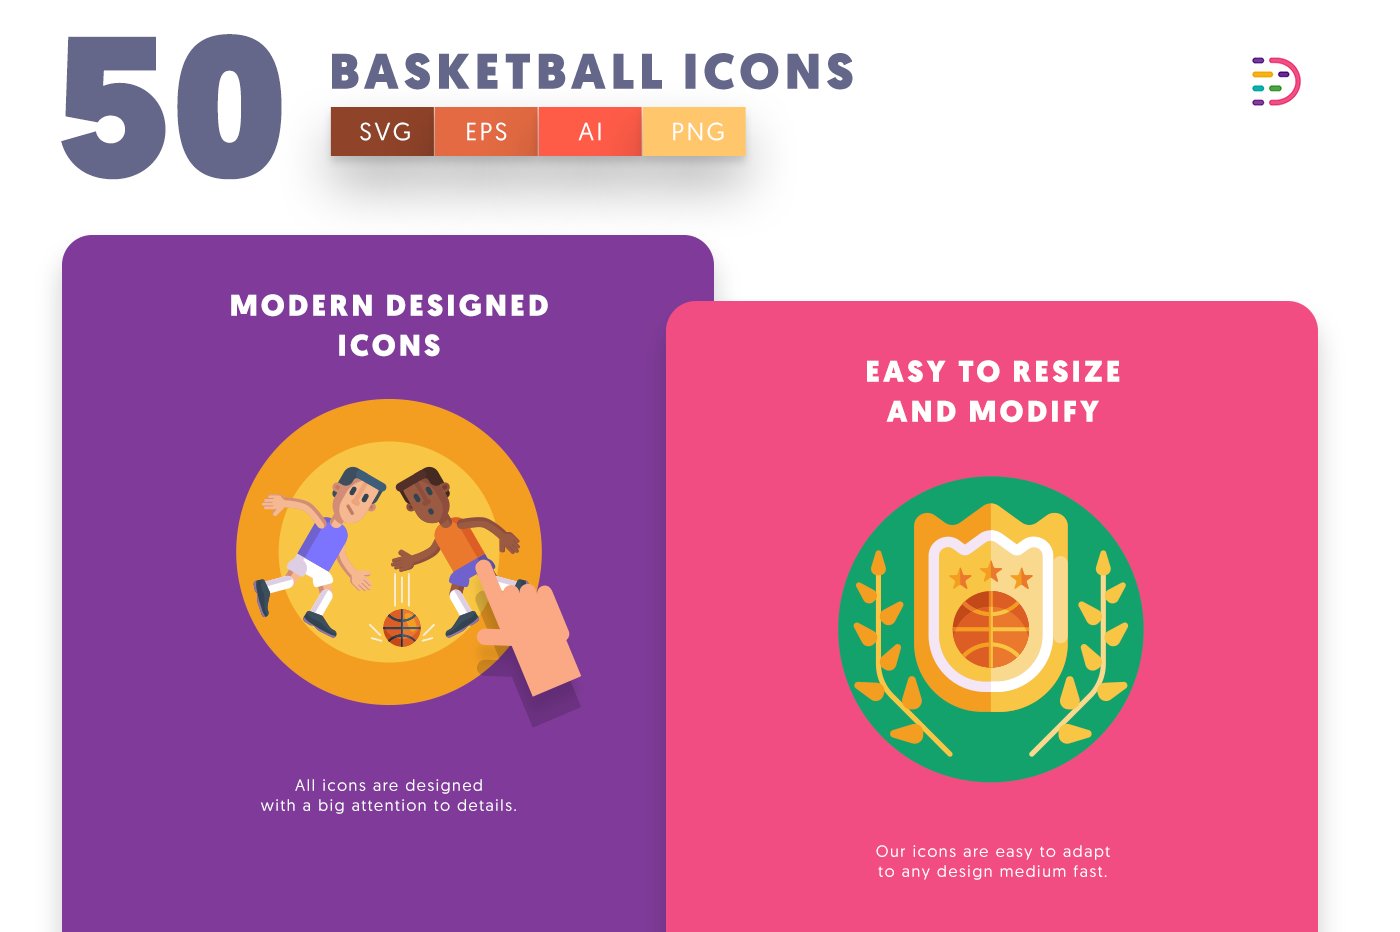 basketball icons cover copy 5 907